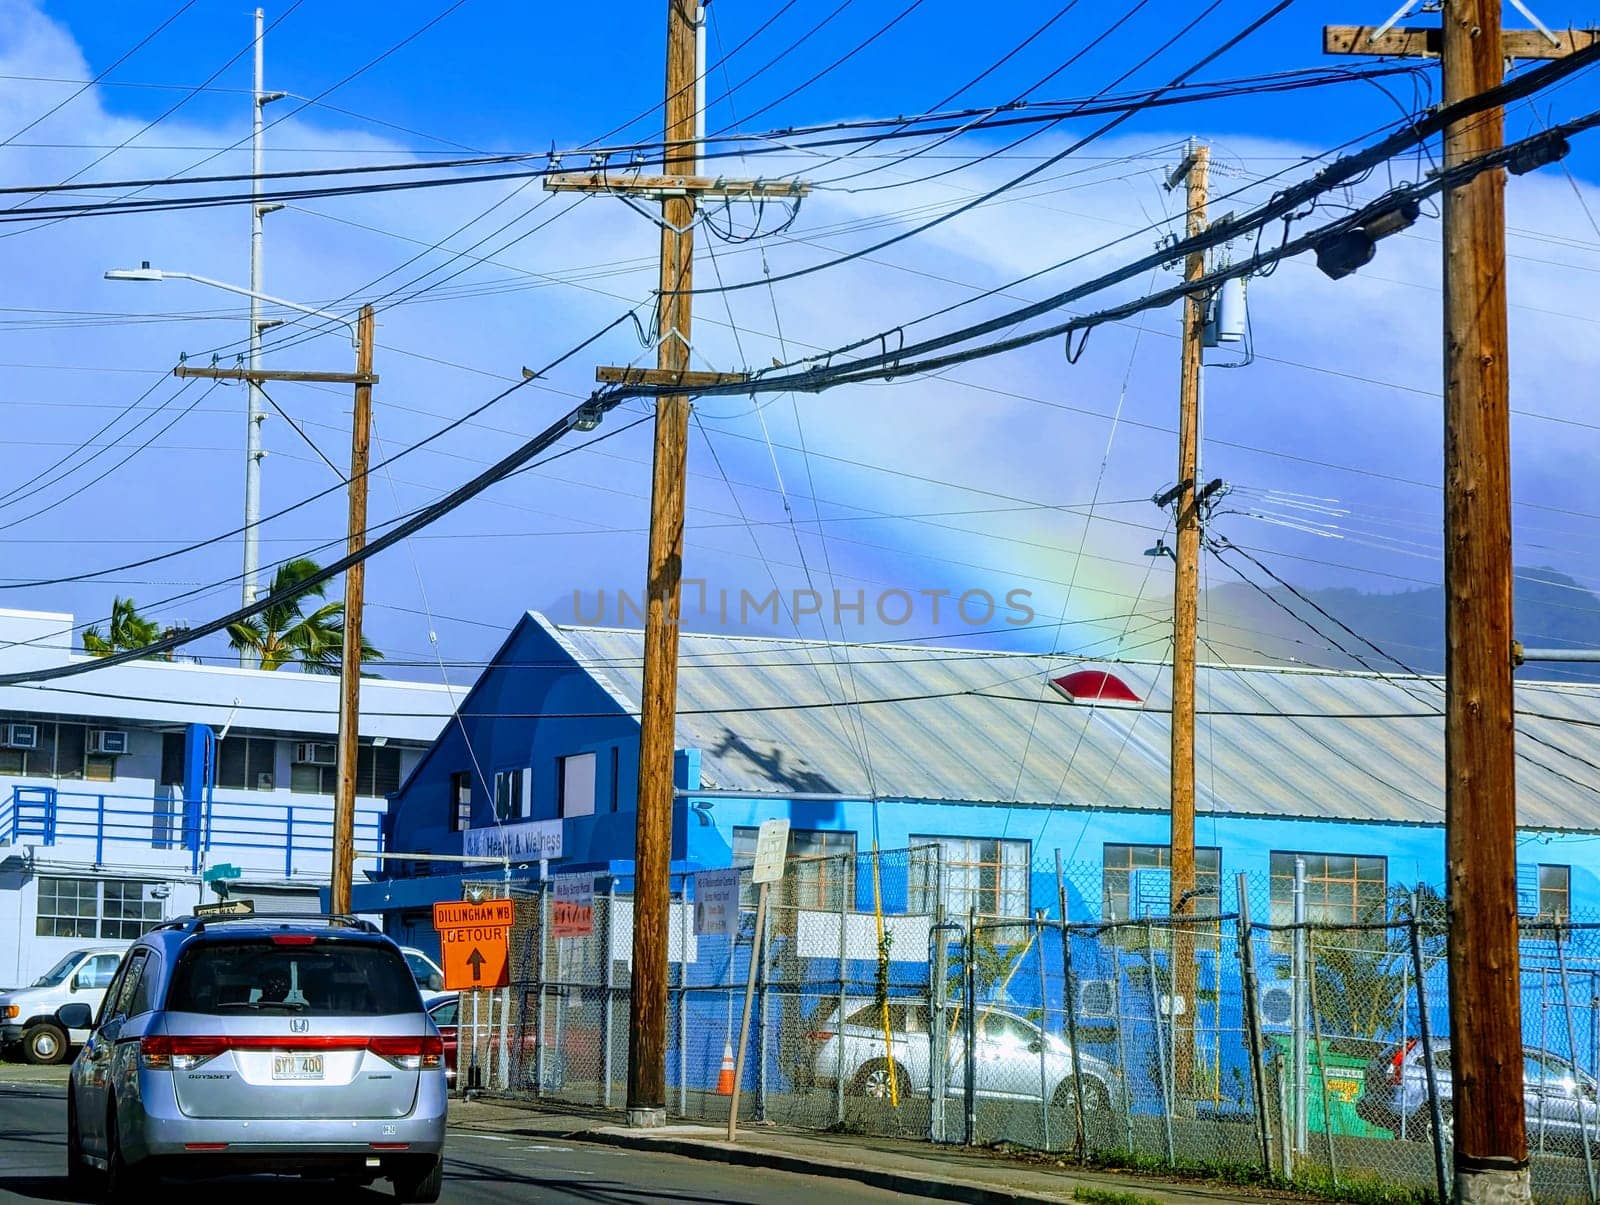 Honolulu - December 28, 2023: Street view in Kalihi, with a focus on utility poles, wires, a car, buildings, and a rainbow in the sky. The photo shows the intricate network of wires and the silver car parked next to a chain-link fence. The photo also shows the blue buildings with red roofs and the mountains in the background.